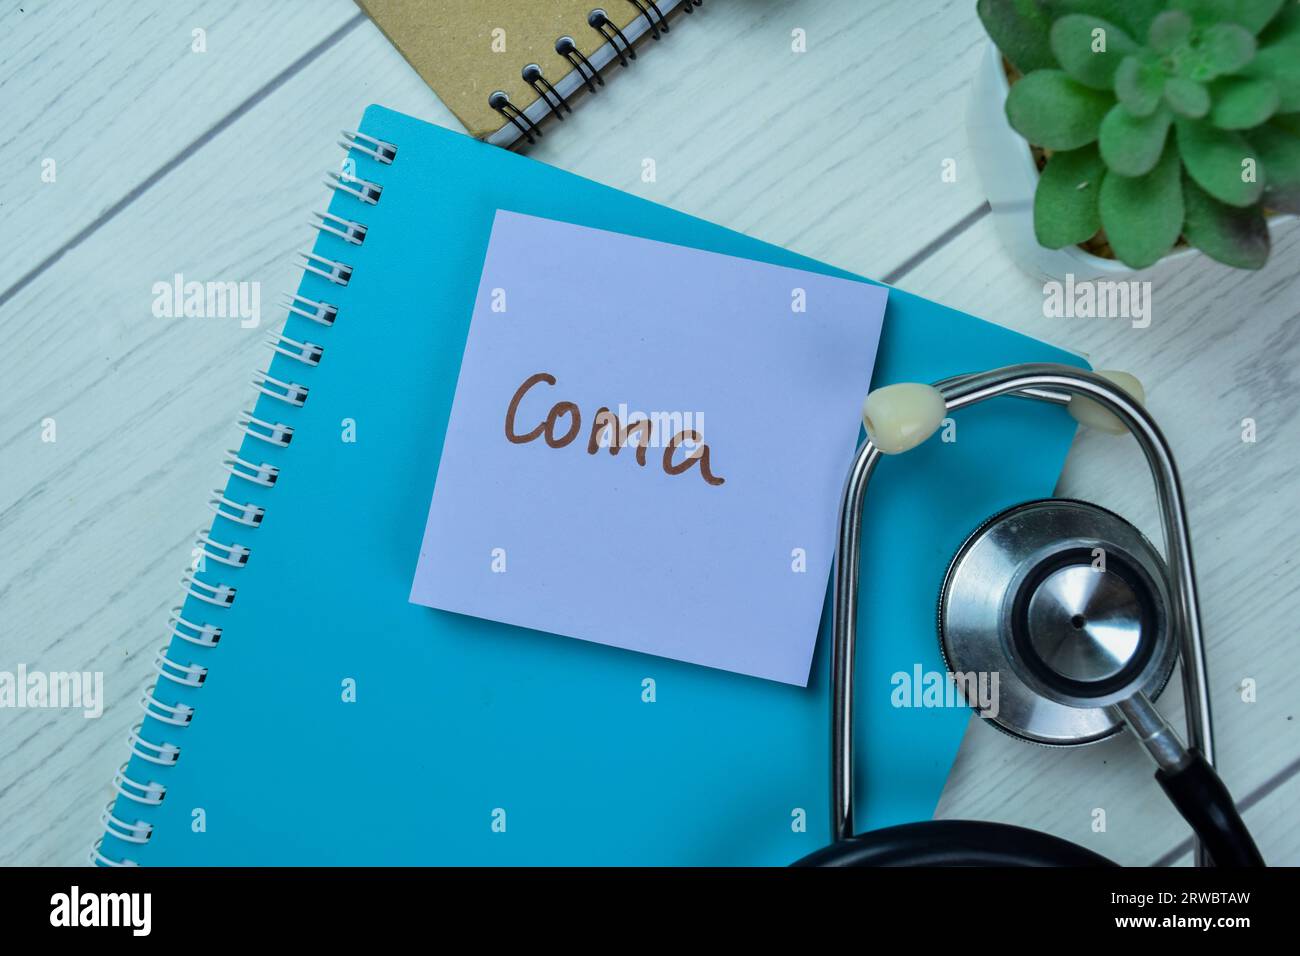 Concept of Coma write on sticky notes with stethoscope isolated on Wooden Table. Stock Photo